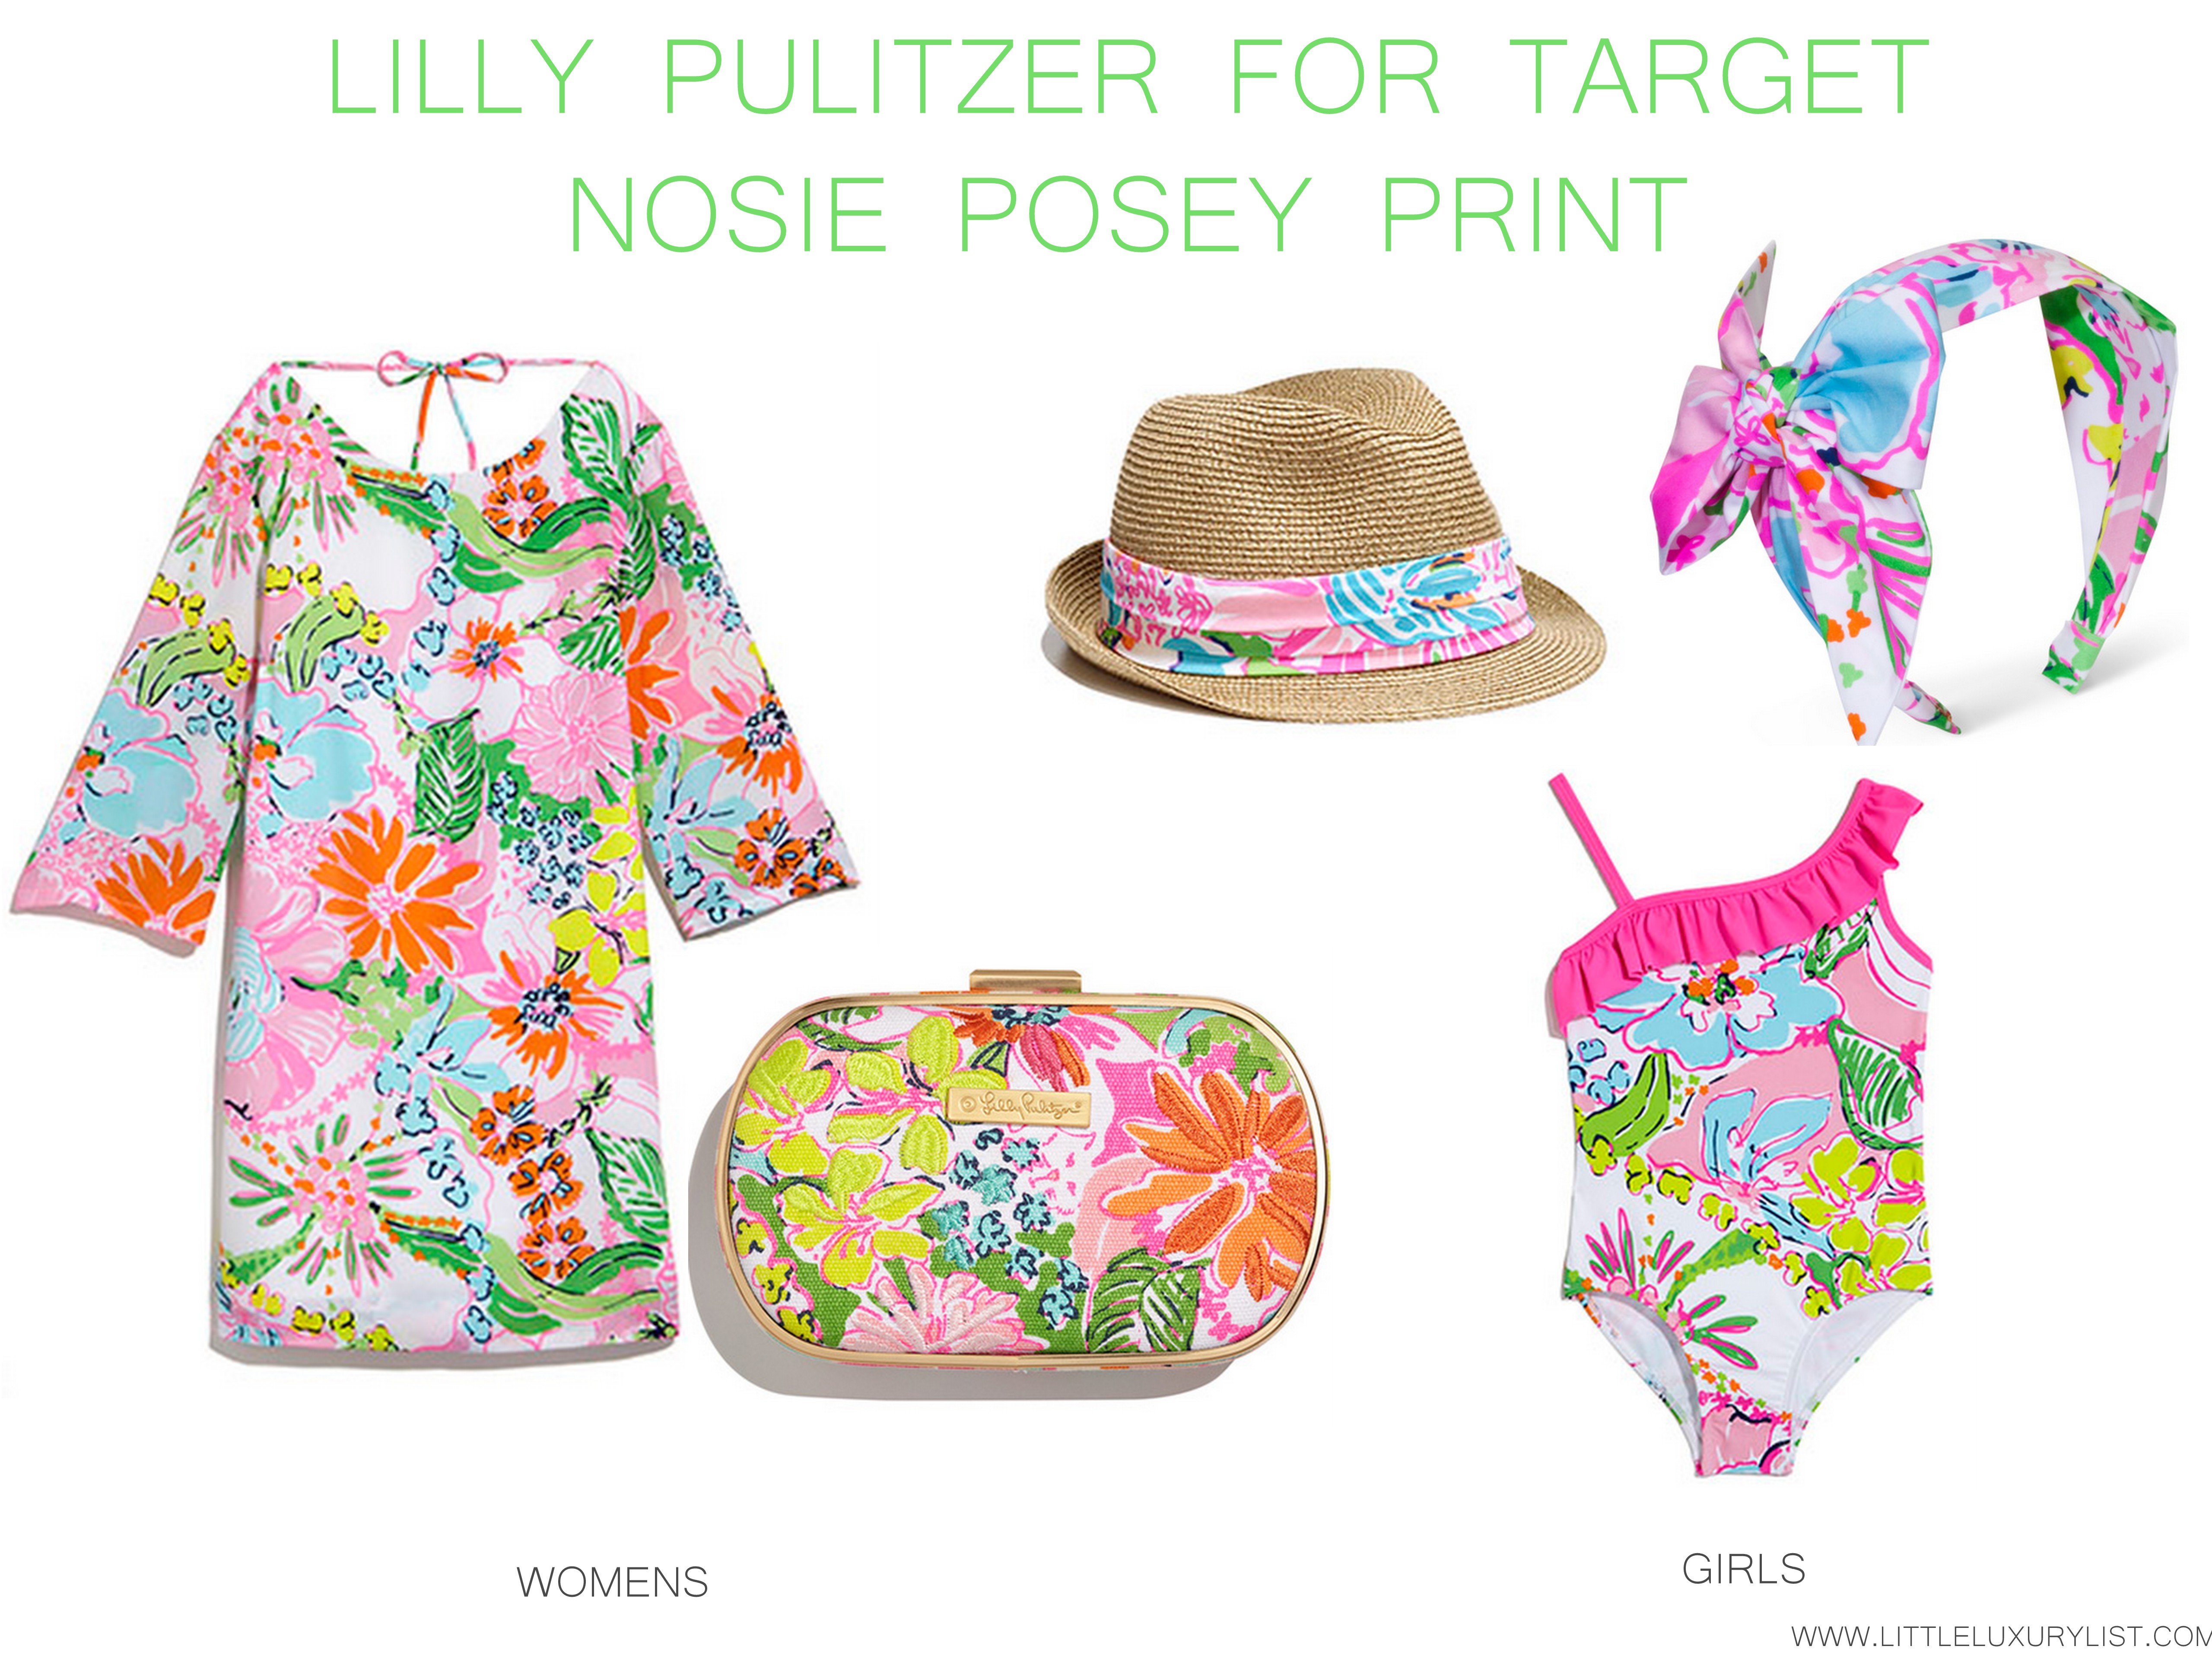 Lilly Pulitzer for Target Sea nosie posey print